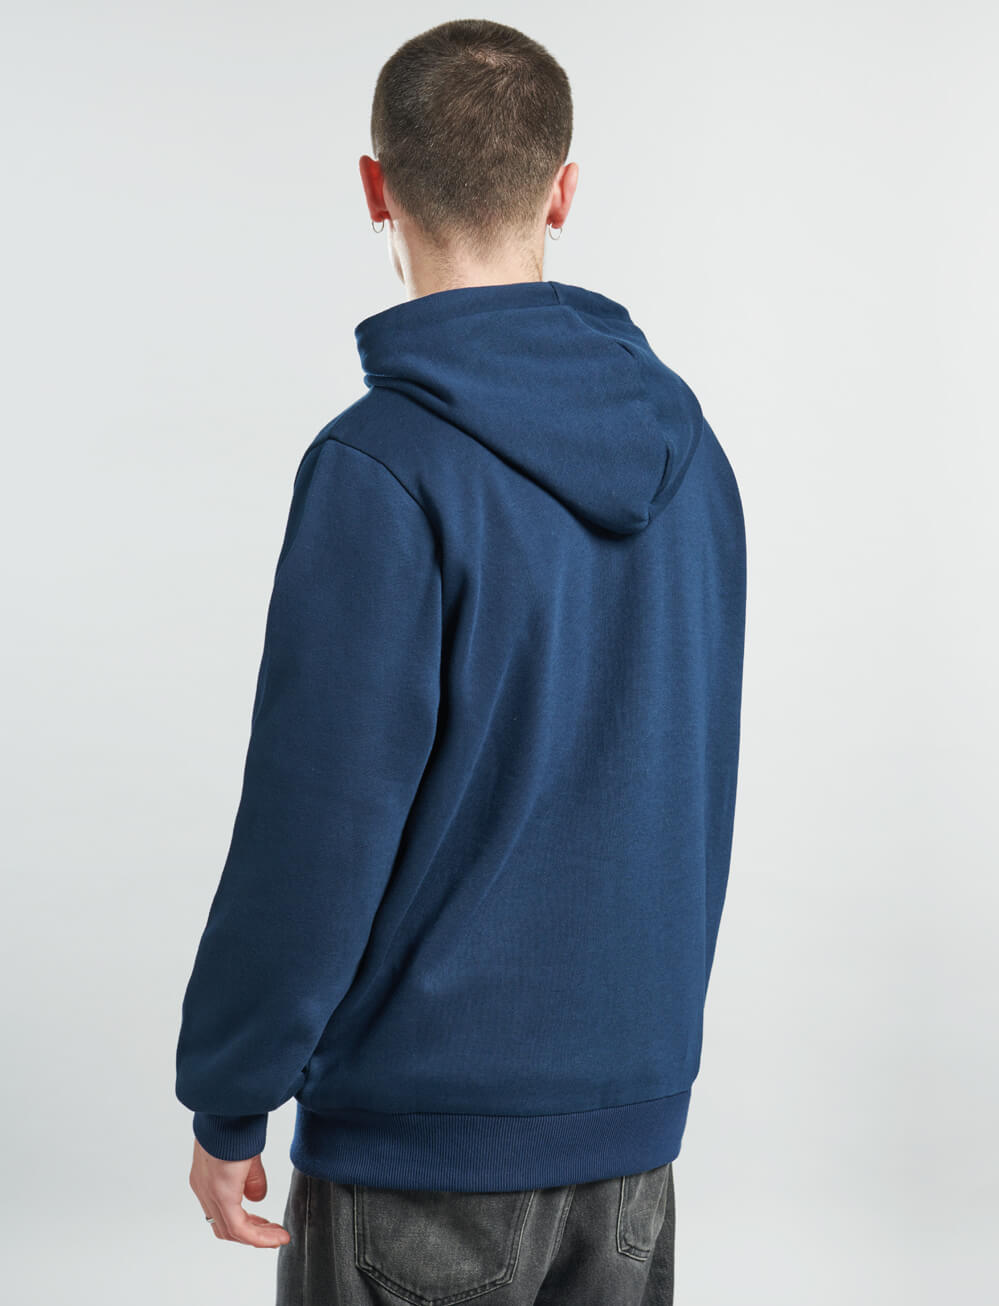 Official West Ham United Zip Hoodie - Navy - The World Football Store